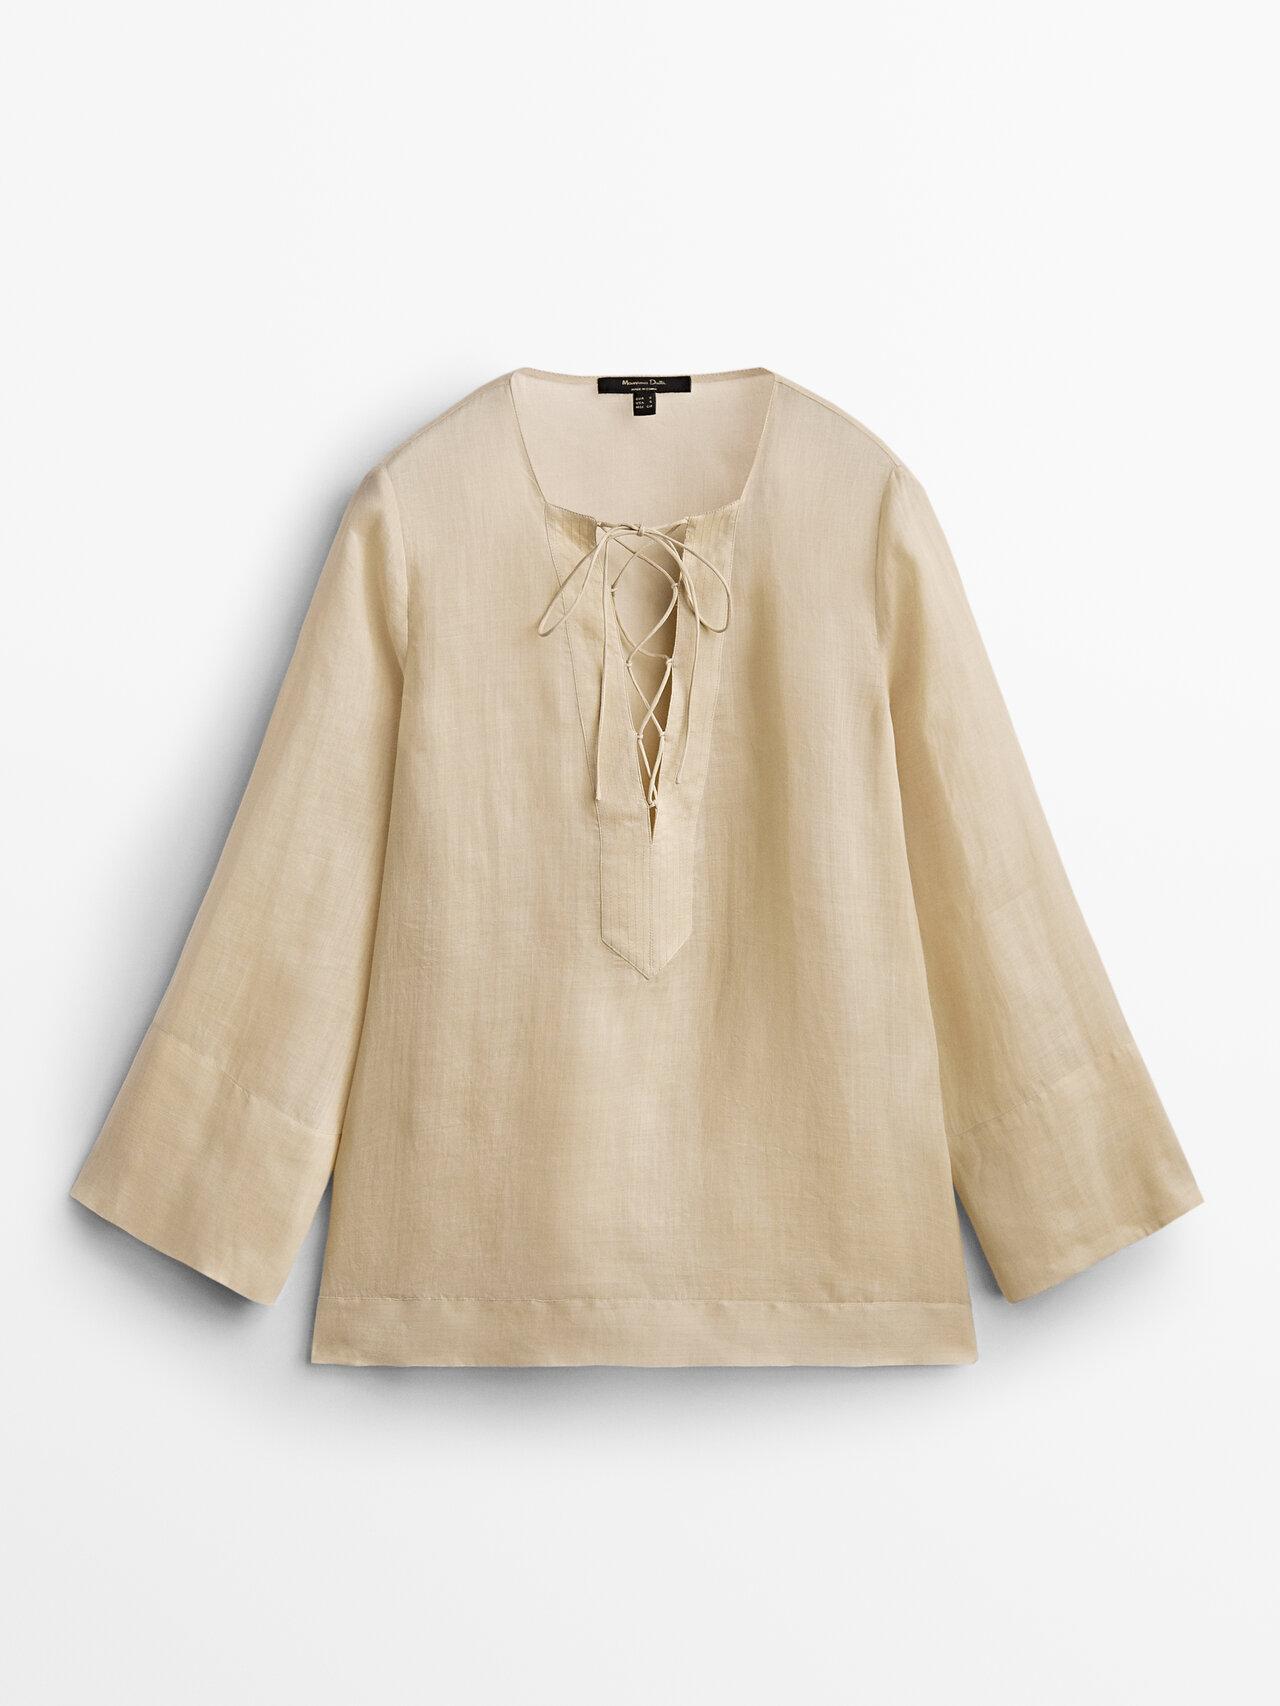 MASSIMO DUTTI Ramie Shirt With Cord Neckline in Natural | Lyst